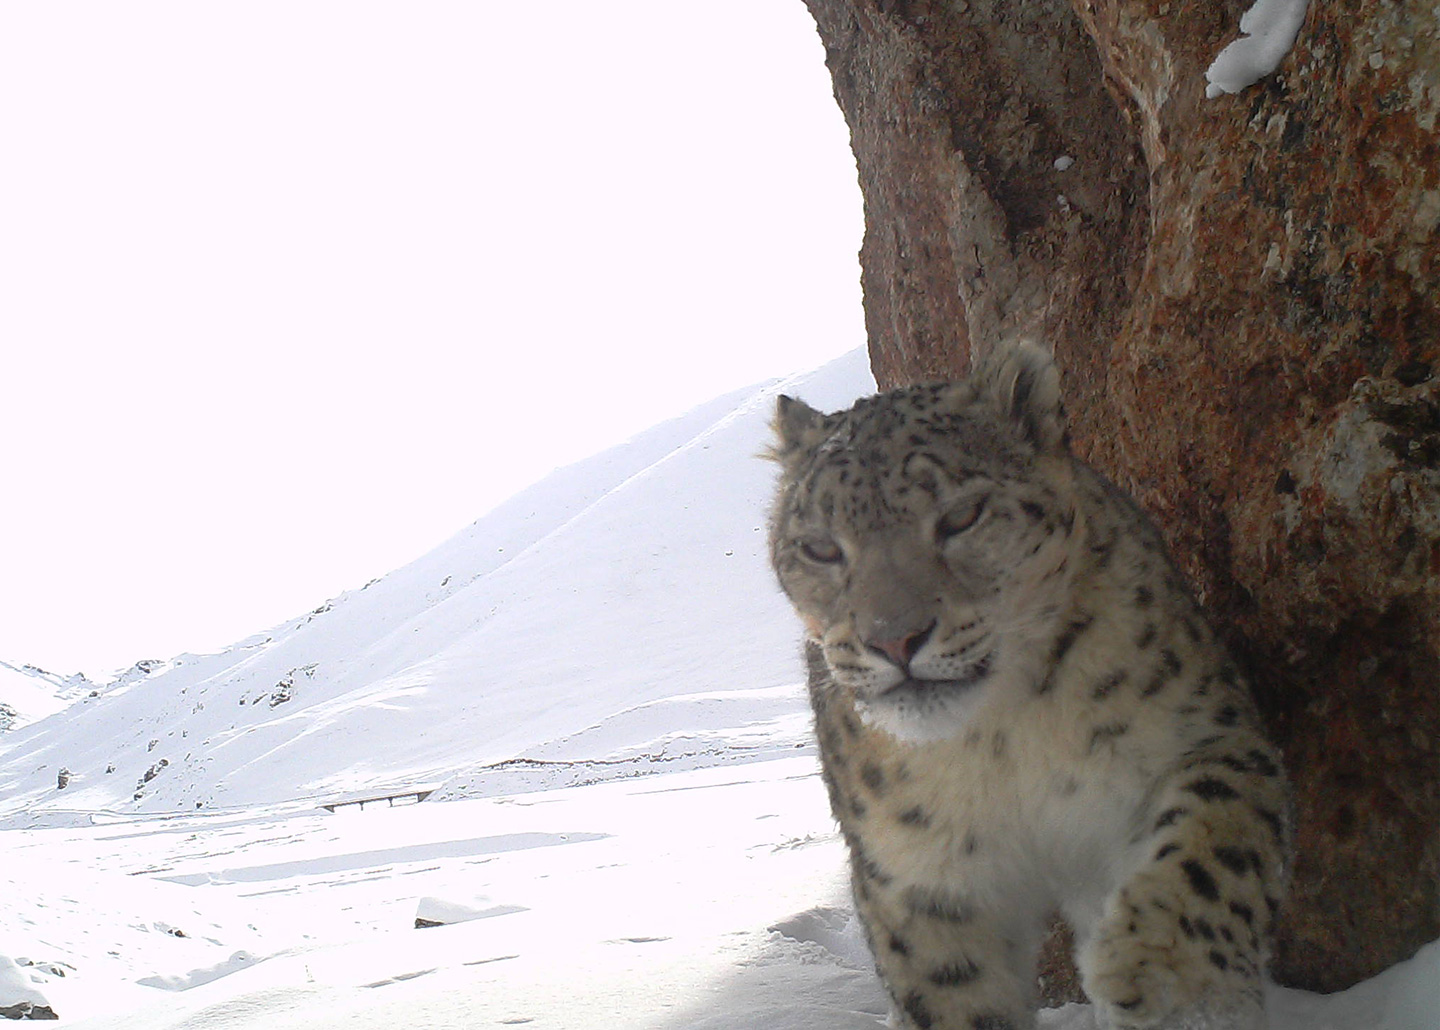 Snow leopard in mountains